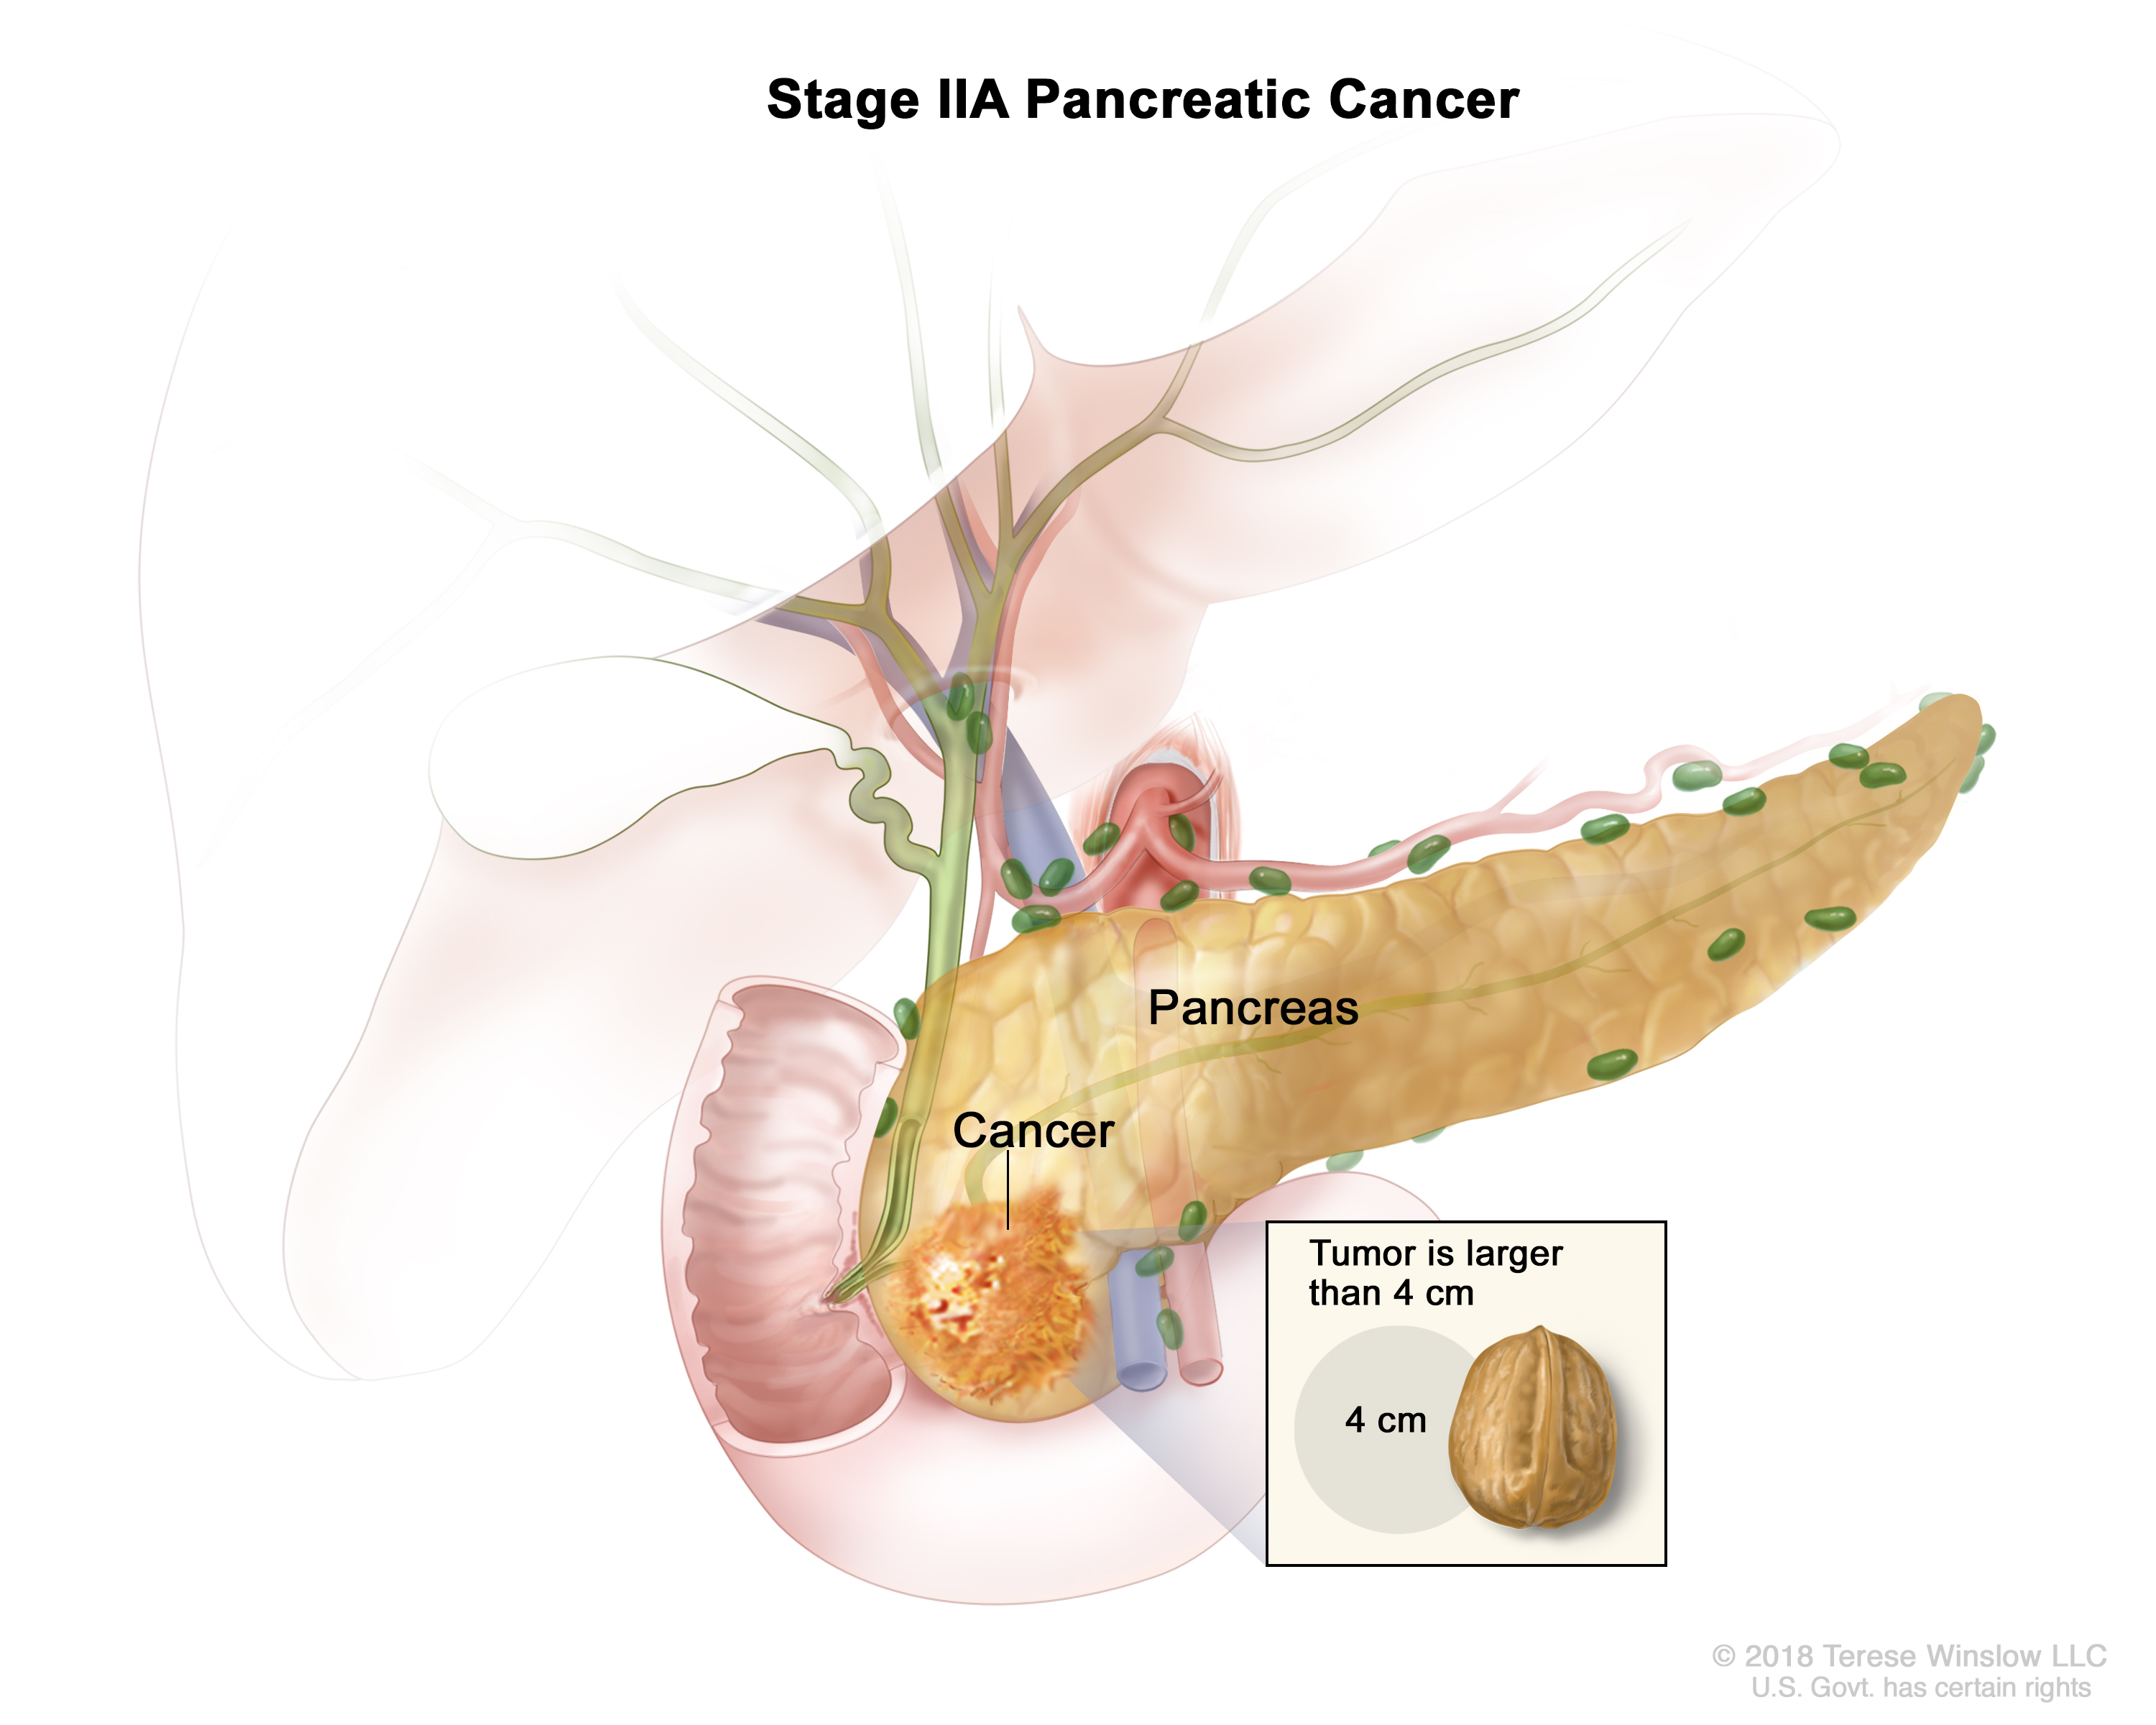 Diagram illustrating stage IIA Pancreatic Cancer, with an inset showing the size comparison of the tumor and a 4cm walnut